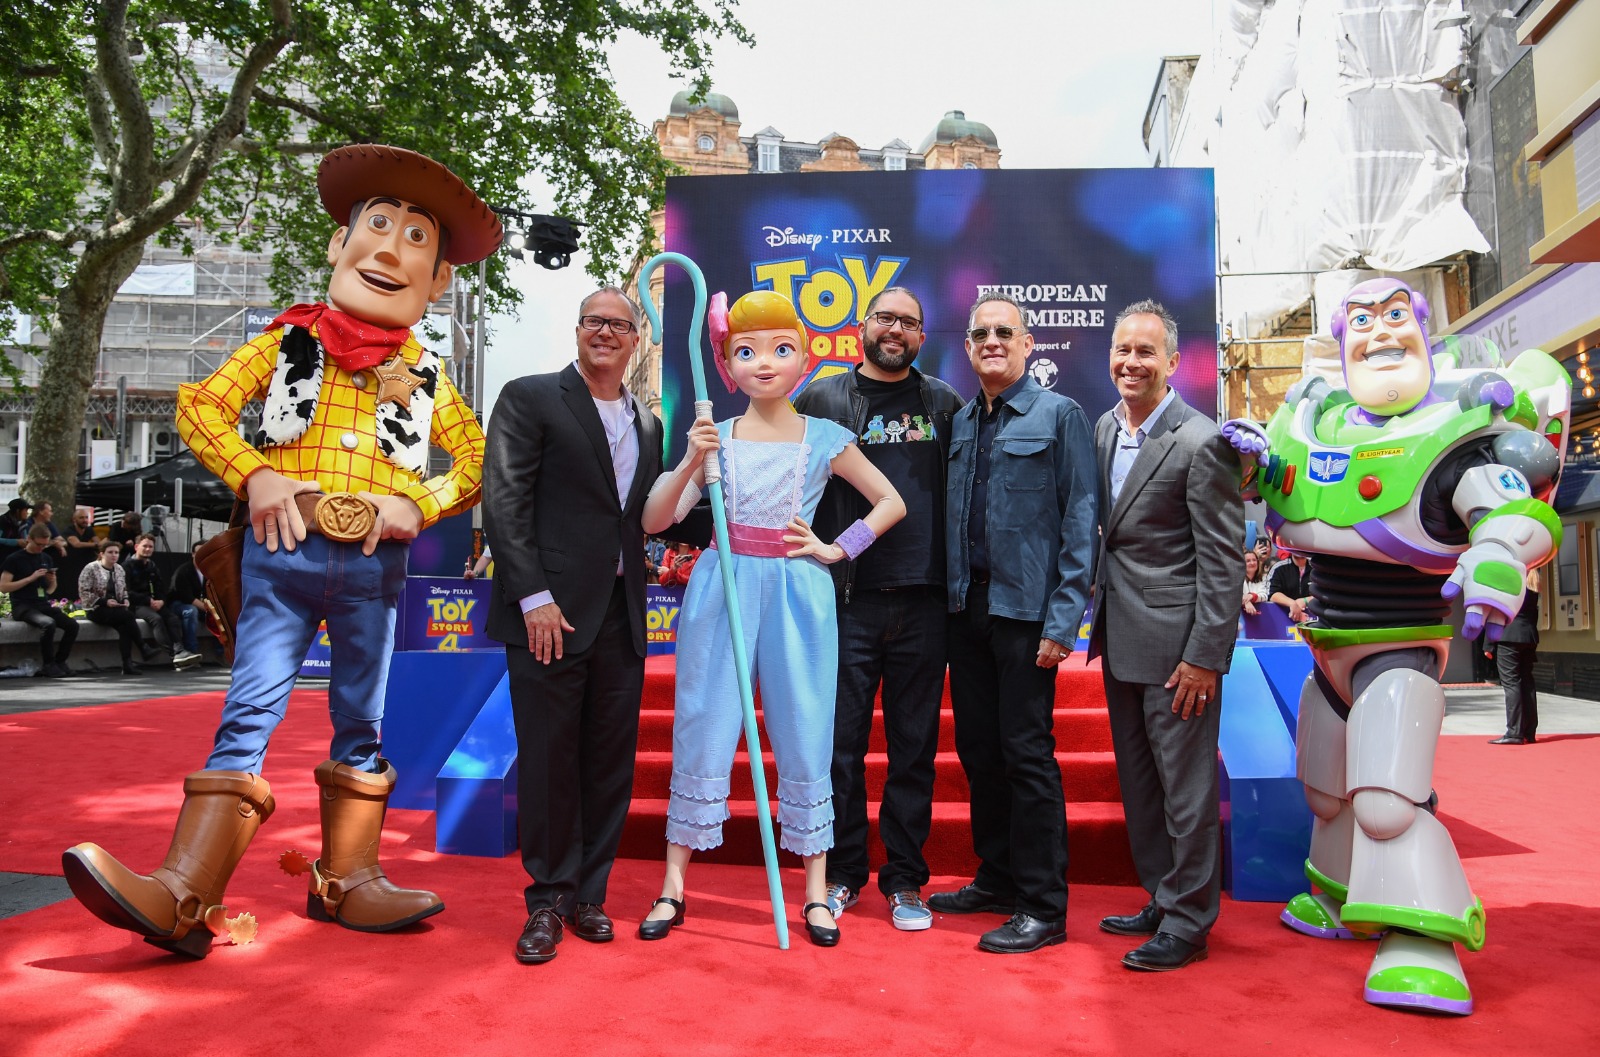 Toy Story 4 Premiere